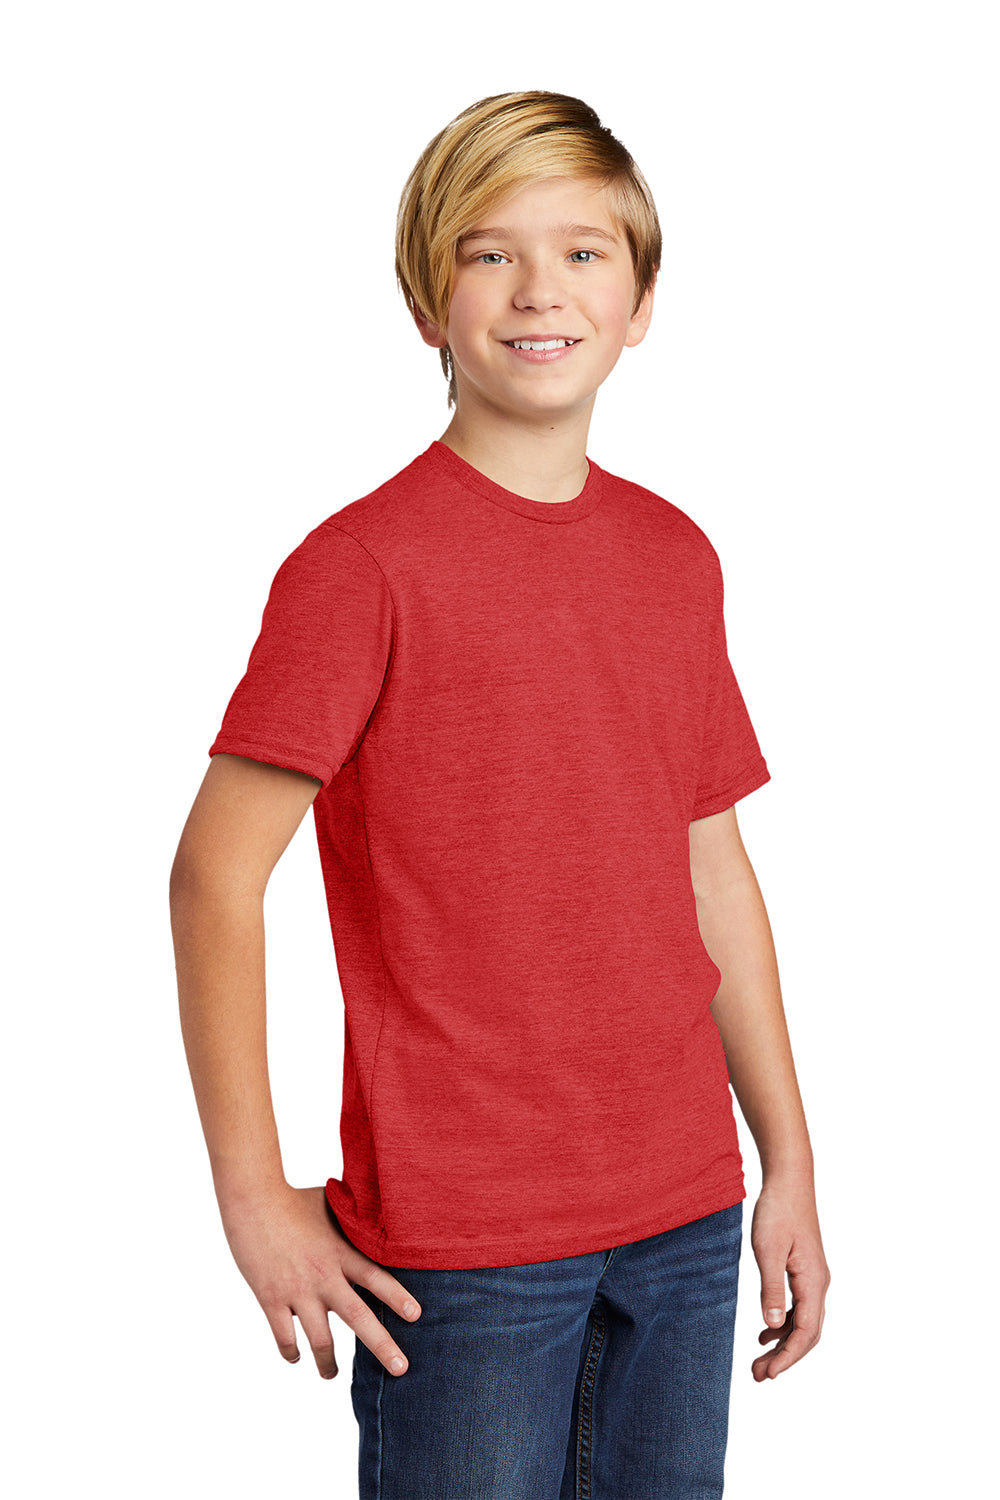 Allmade AL207 Youth Short Sleeve Crewneck T-Shirt Rise Up Red Model 3Q